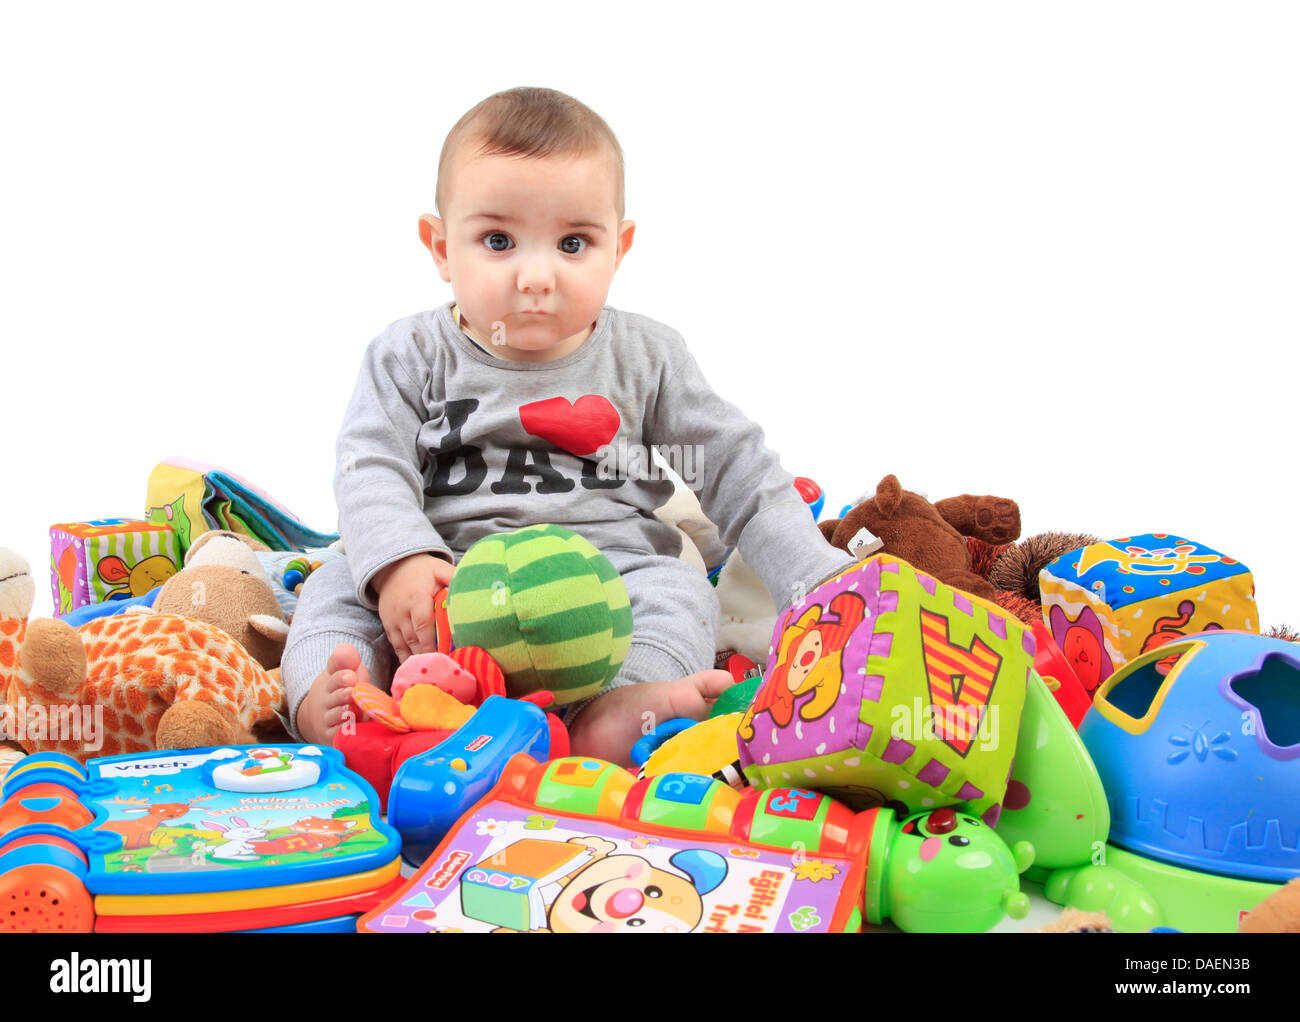 baby sitting in a heap of playthings Stock Photo